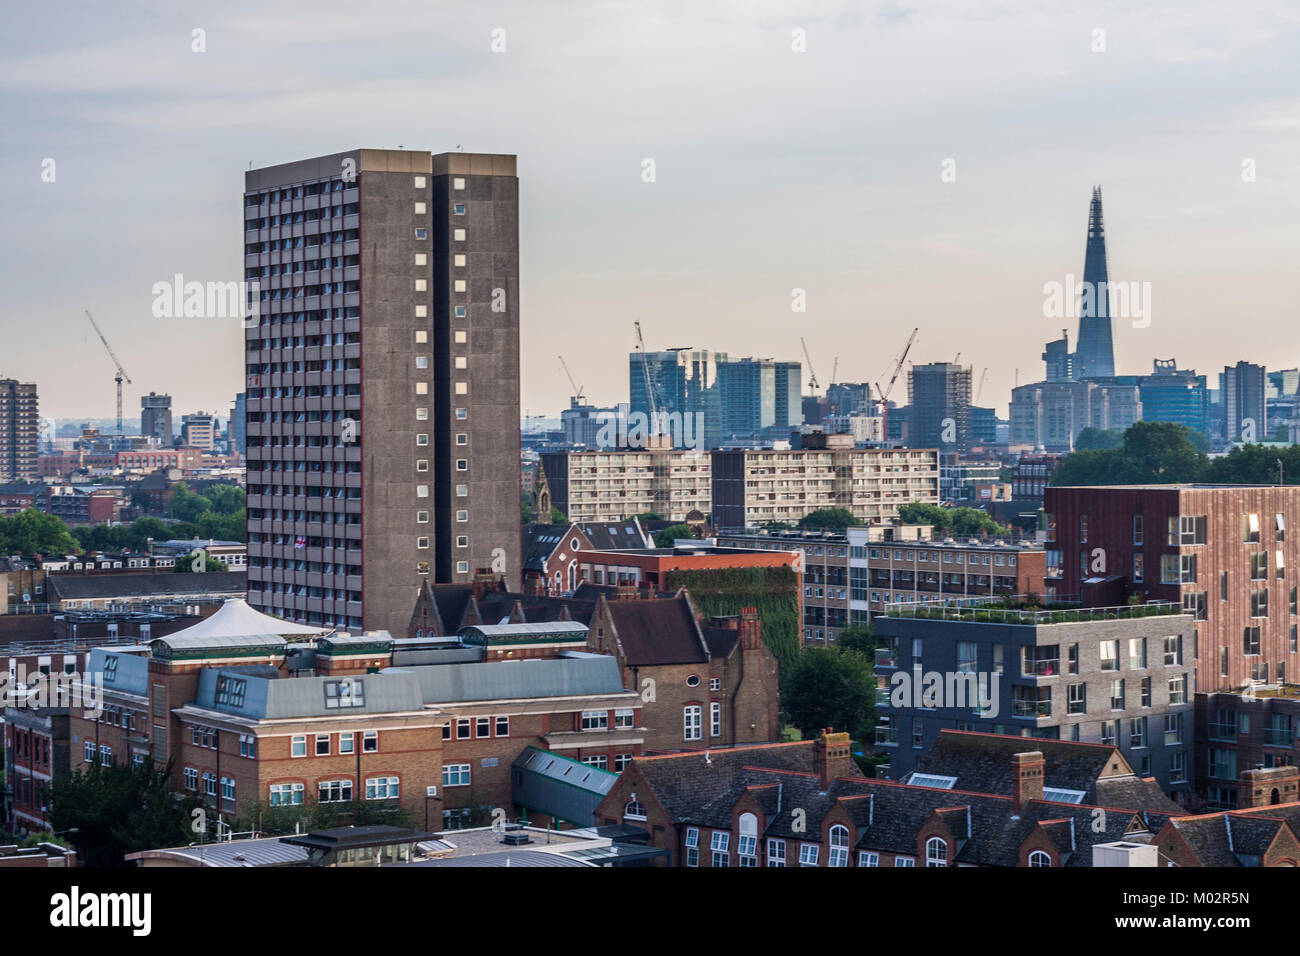 London skyline featuring a high rise tower block in London,England,UK viewed from Tower Hamlets Stock Photo